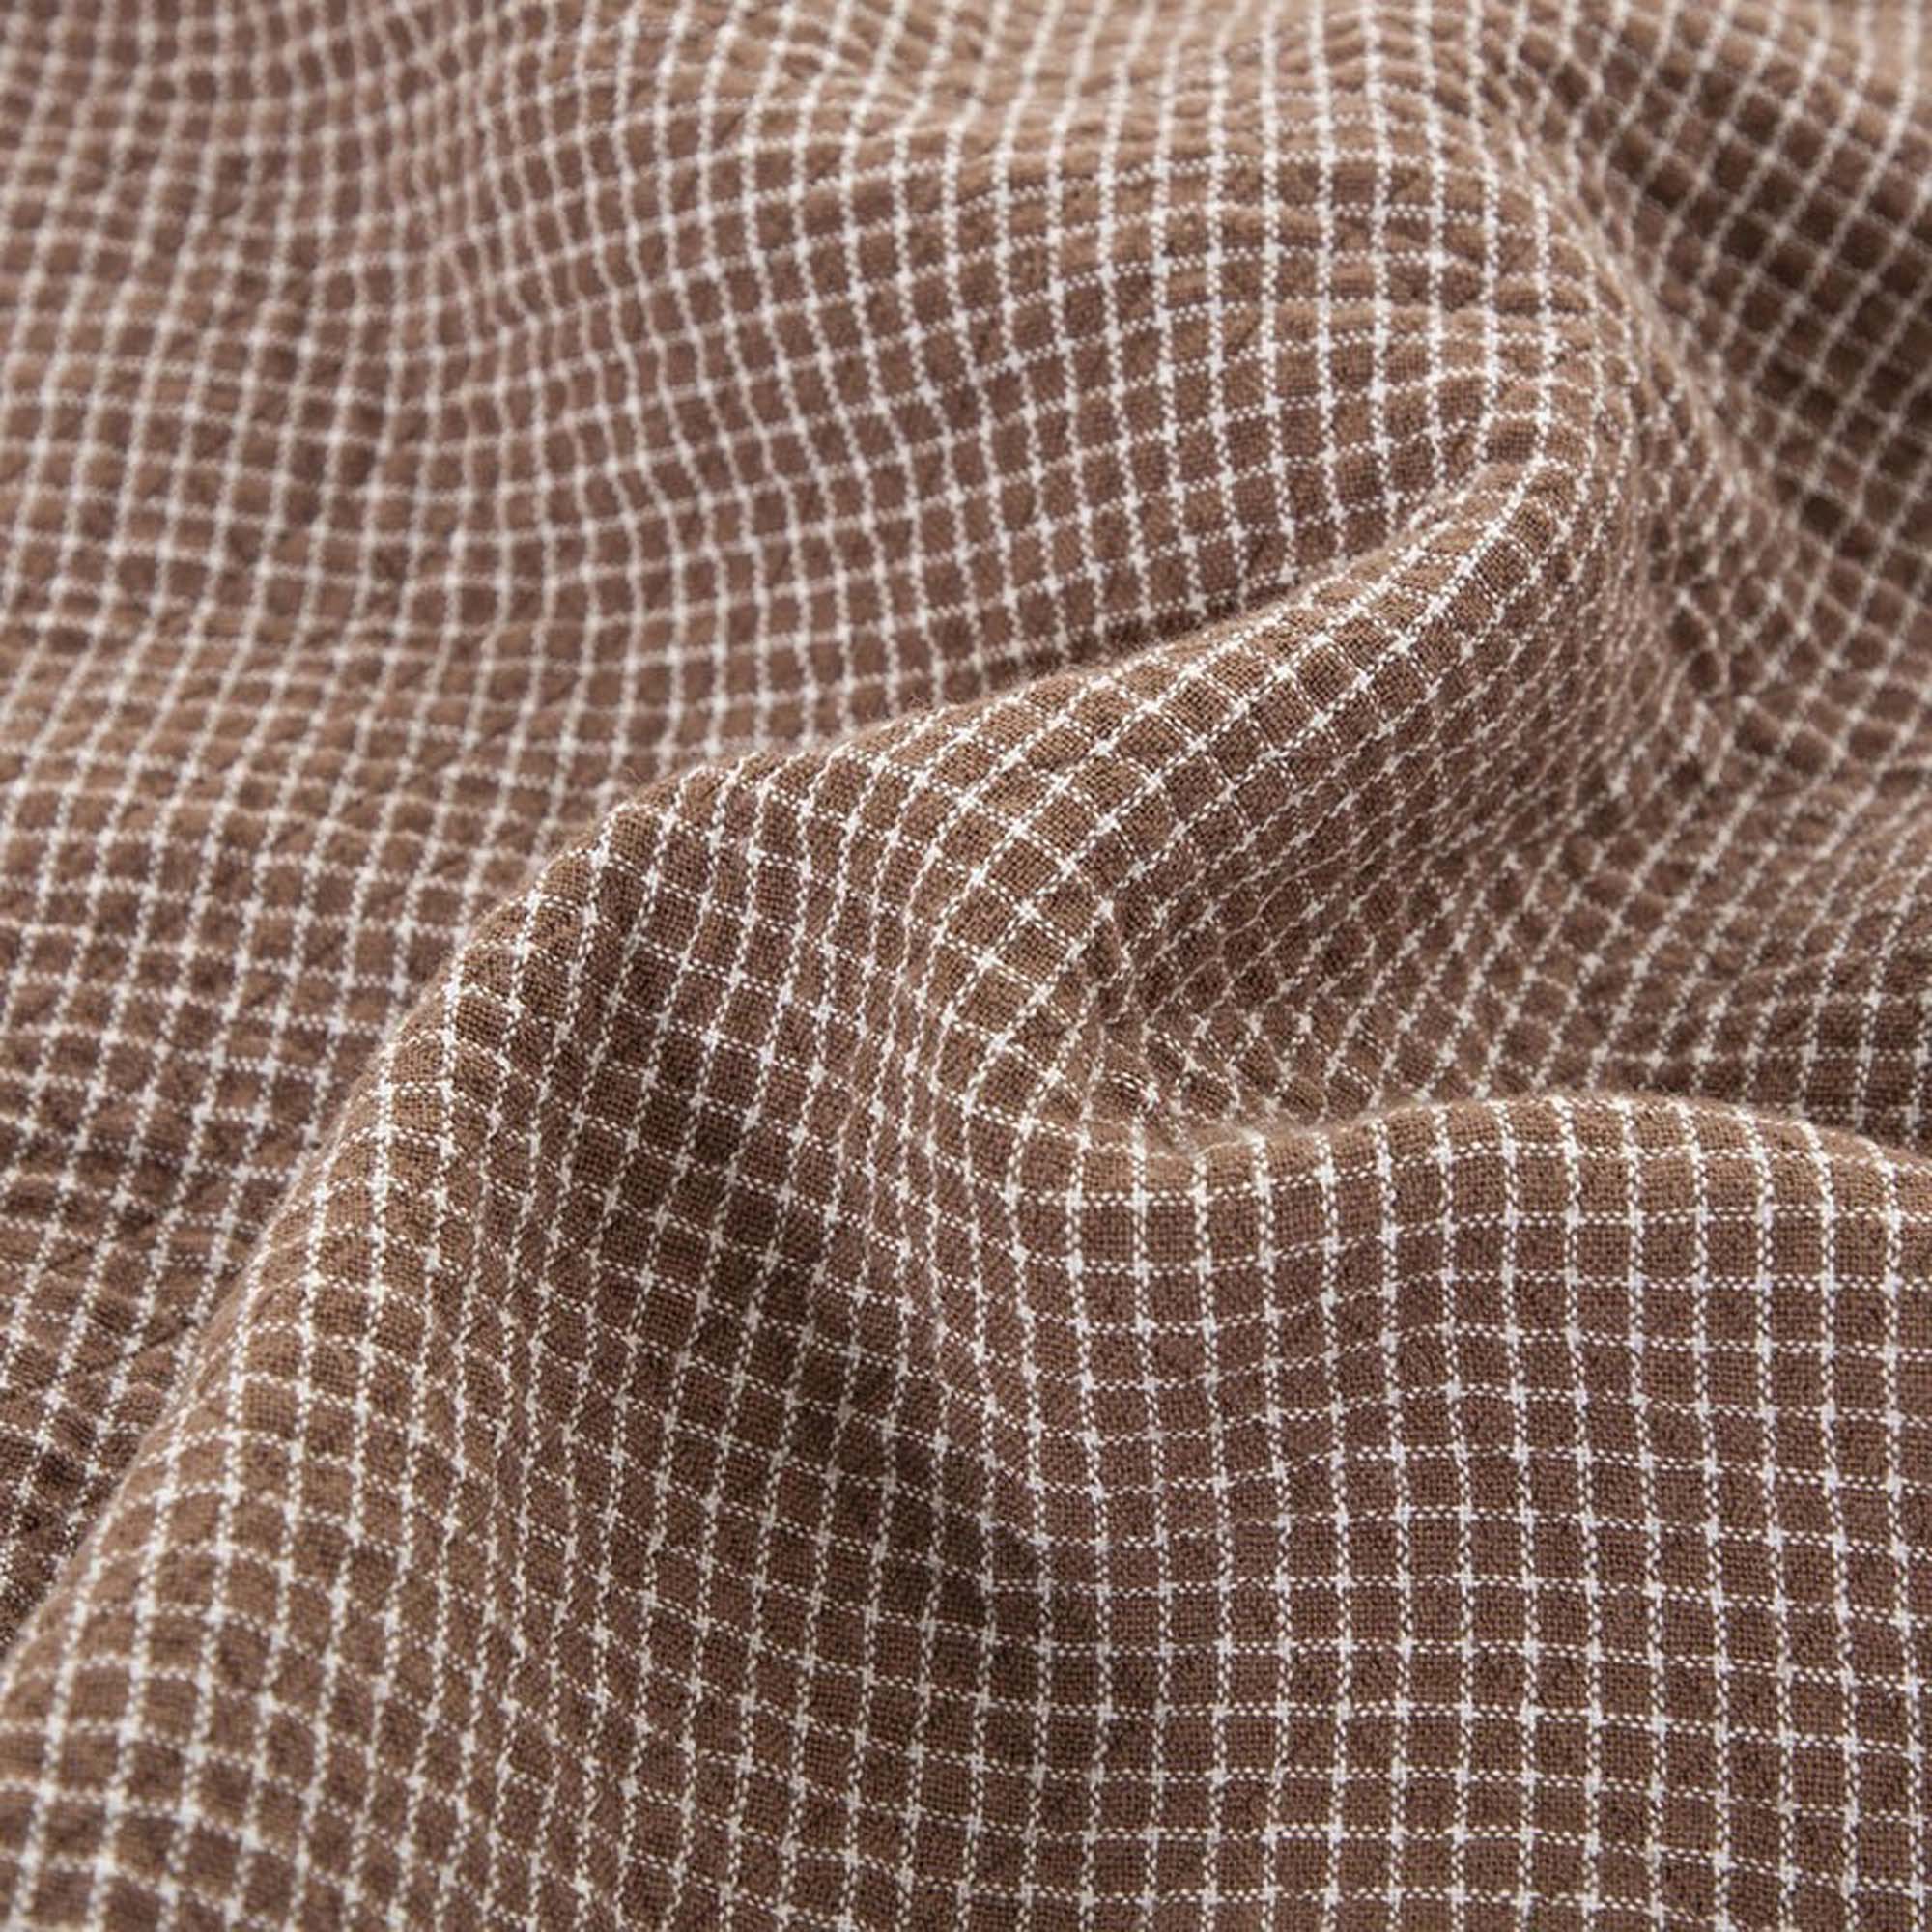 Cotton Blanket / Bed Throw - Tobacco